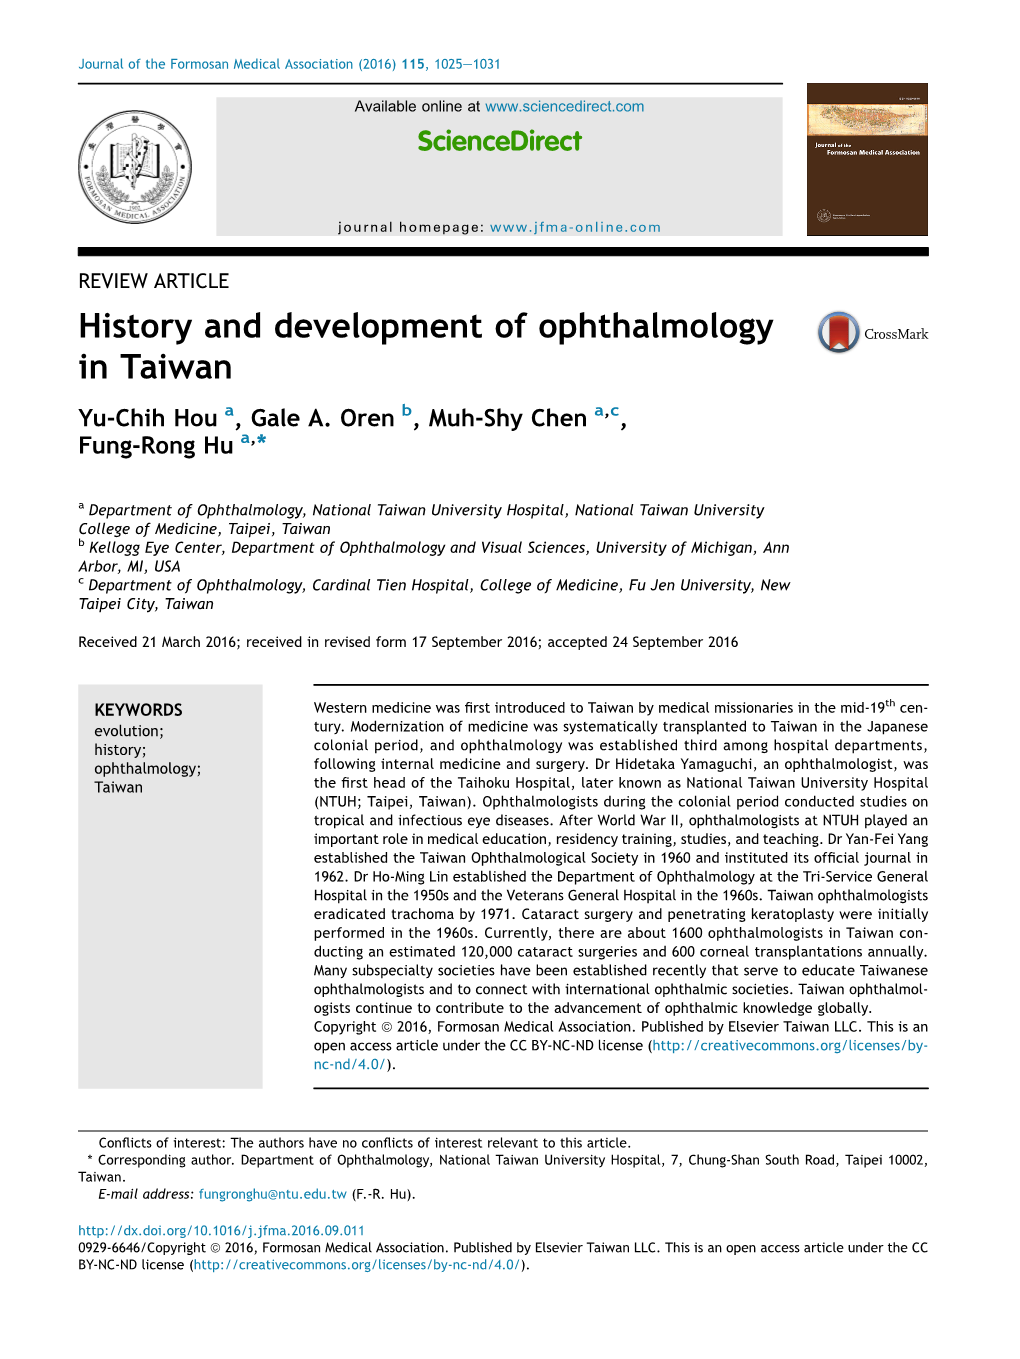 History and Development of Ophthalmology in Taiwan Yu-Chih Hou A, Gale A